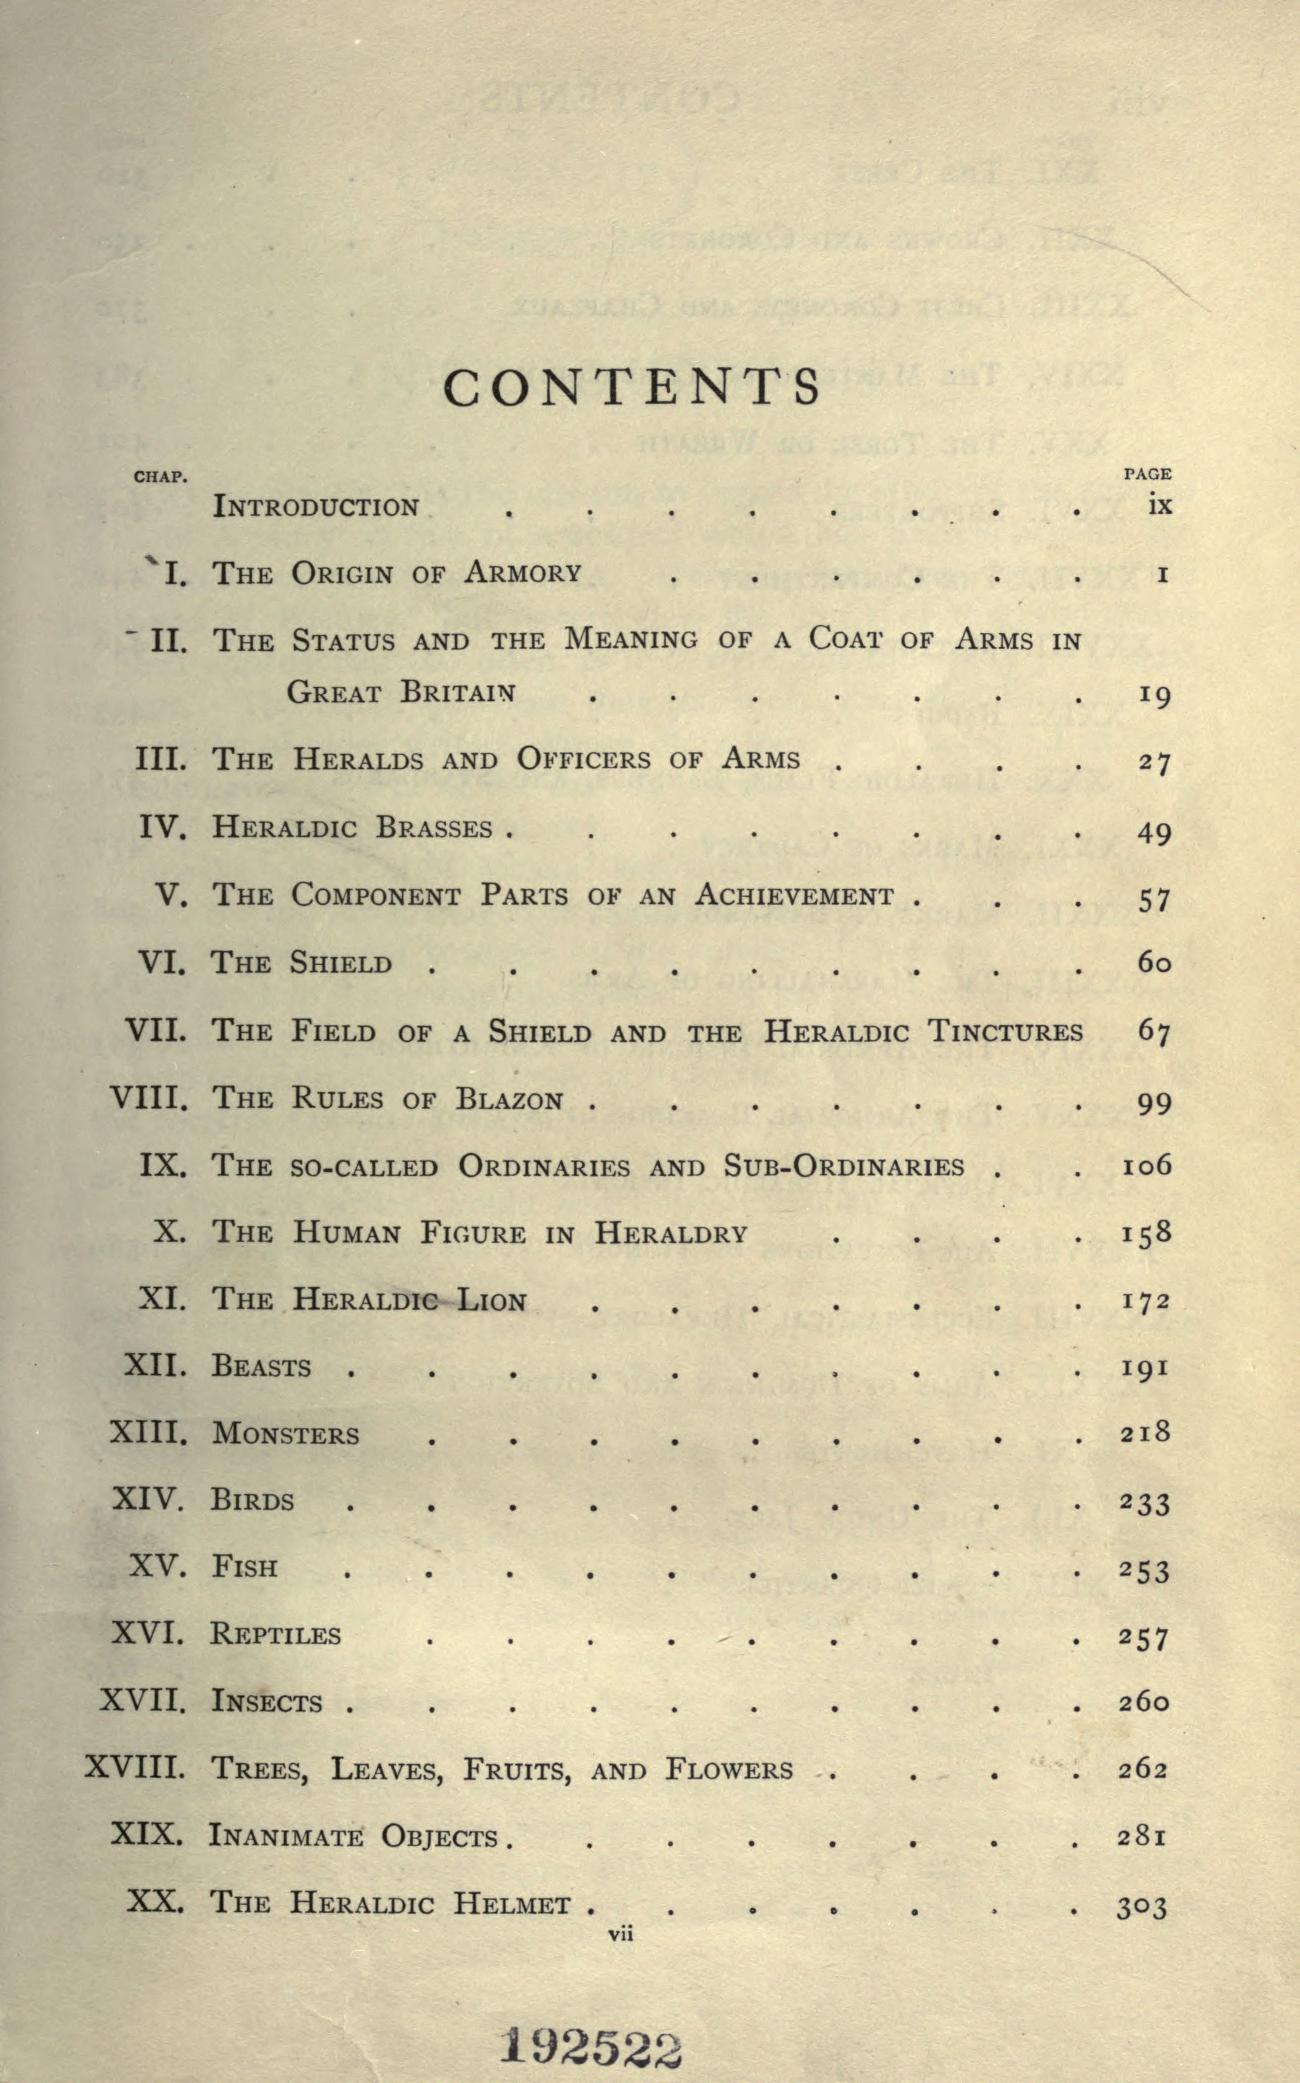 Image of A Complete Guide To Heraldry 1909 Contents Page1